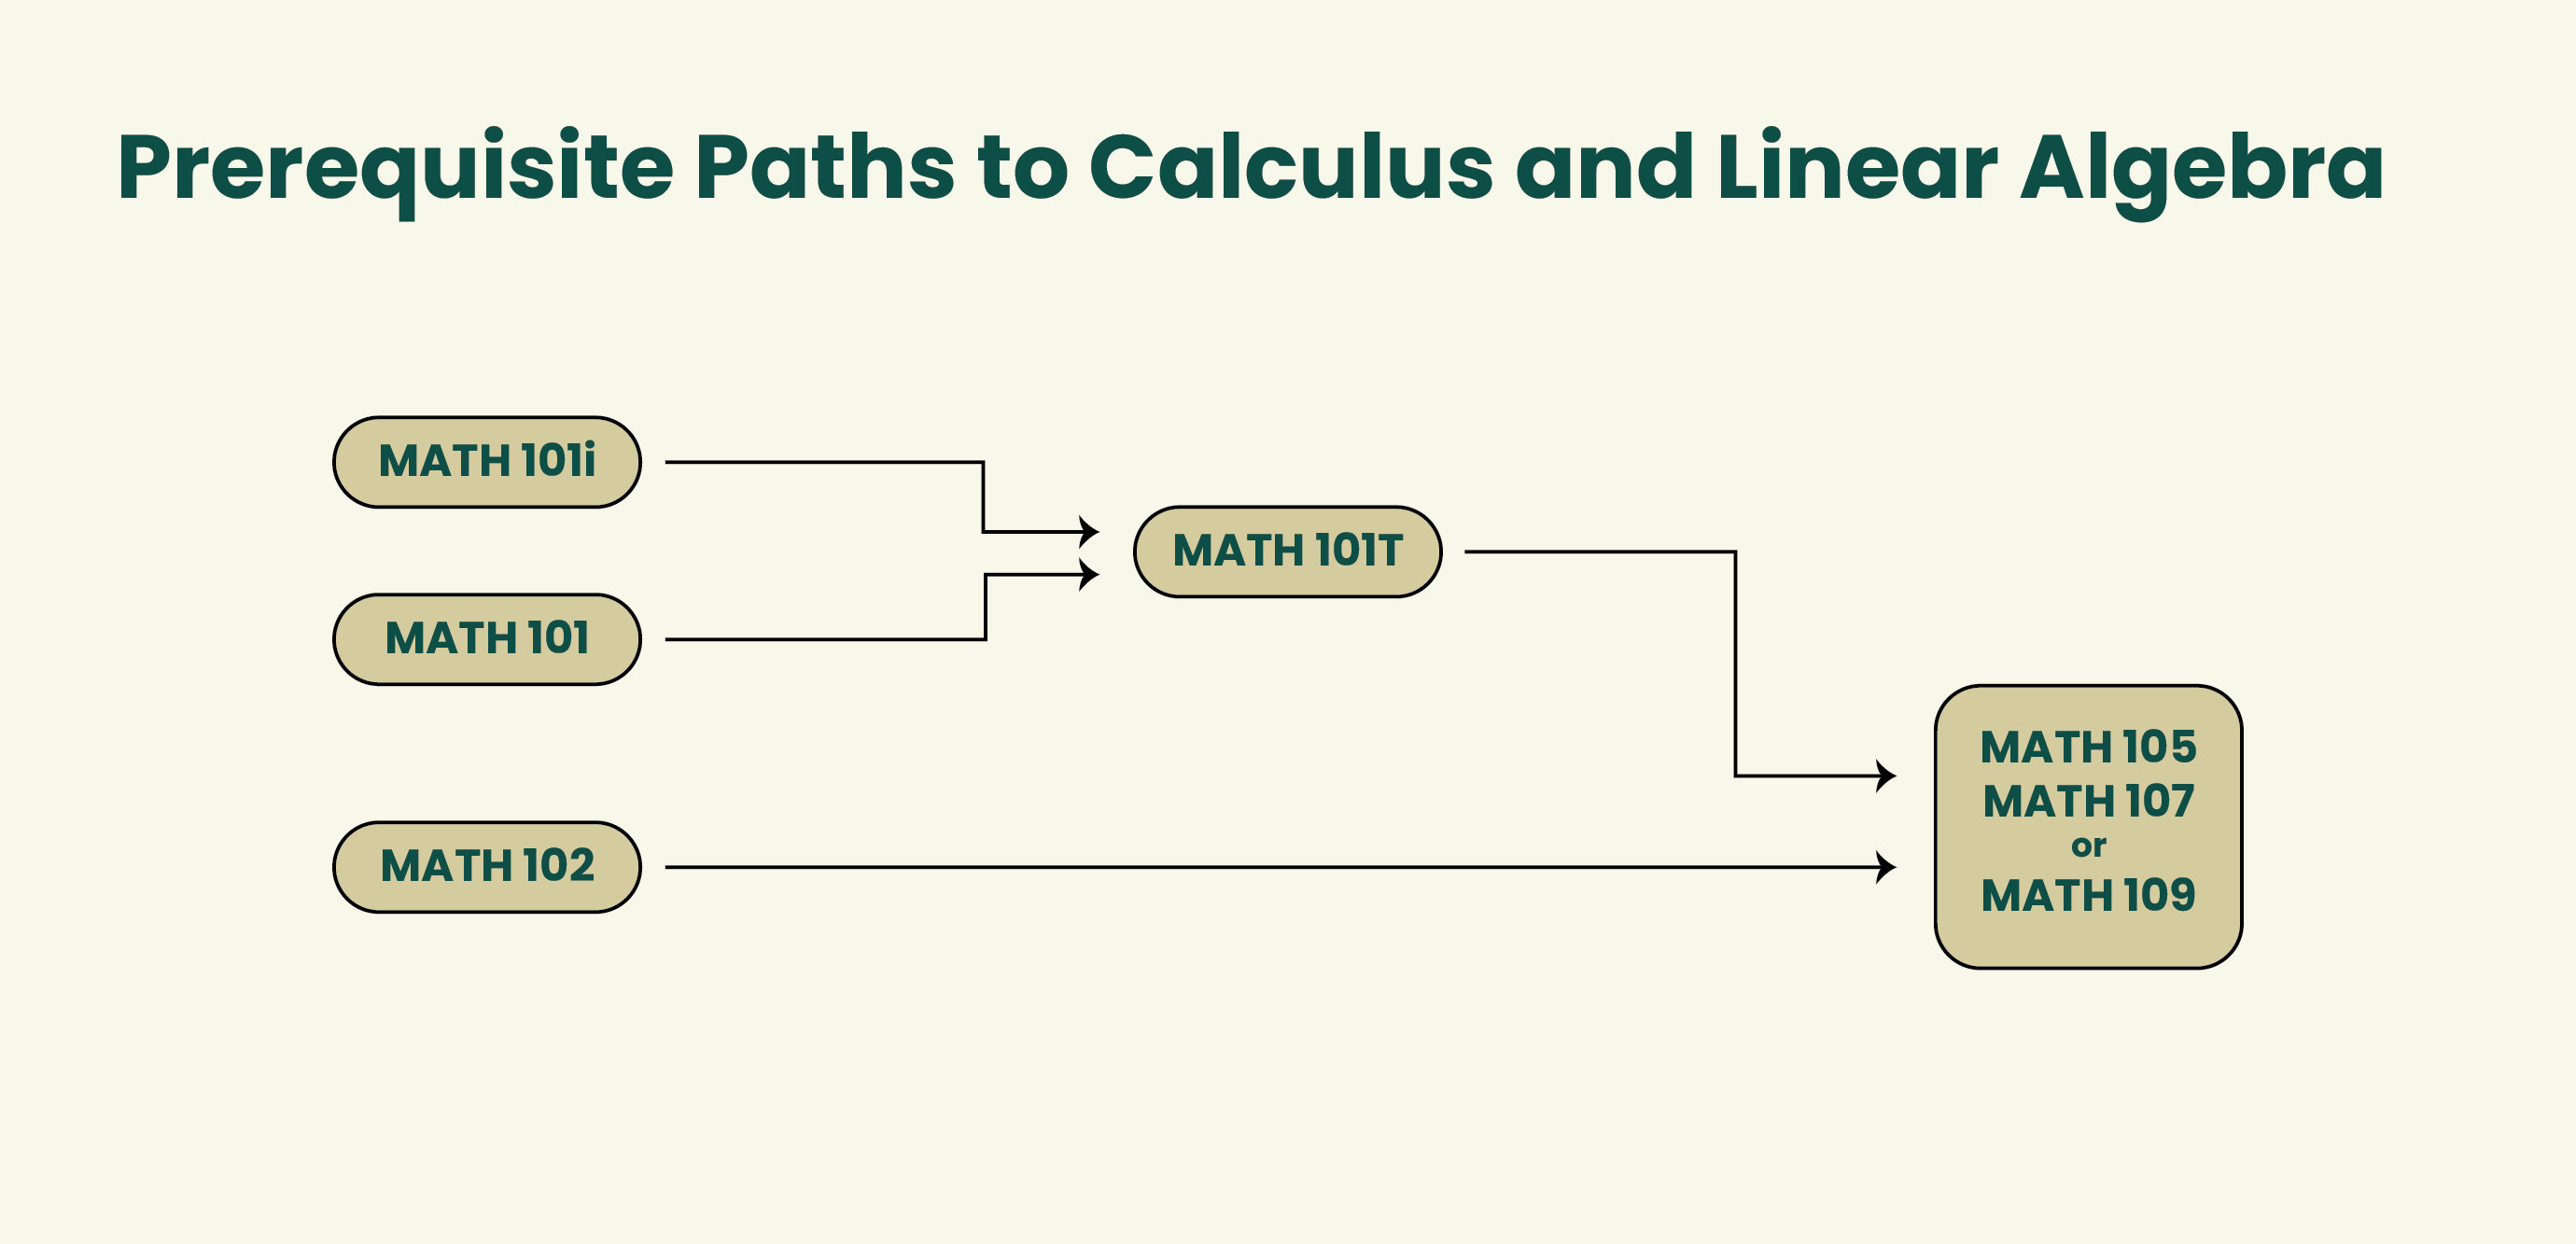 Image showing prerequisite pathways to calculus and linear algebra